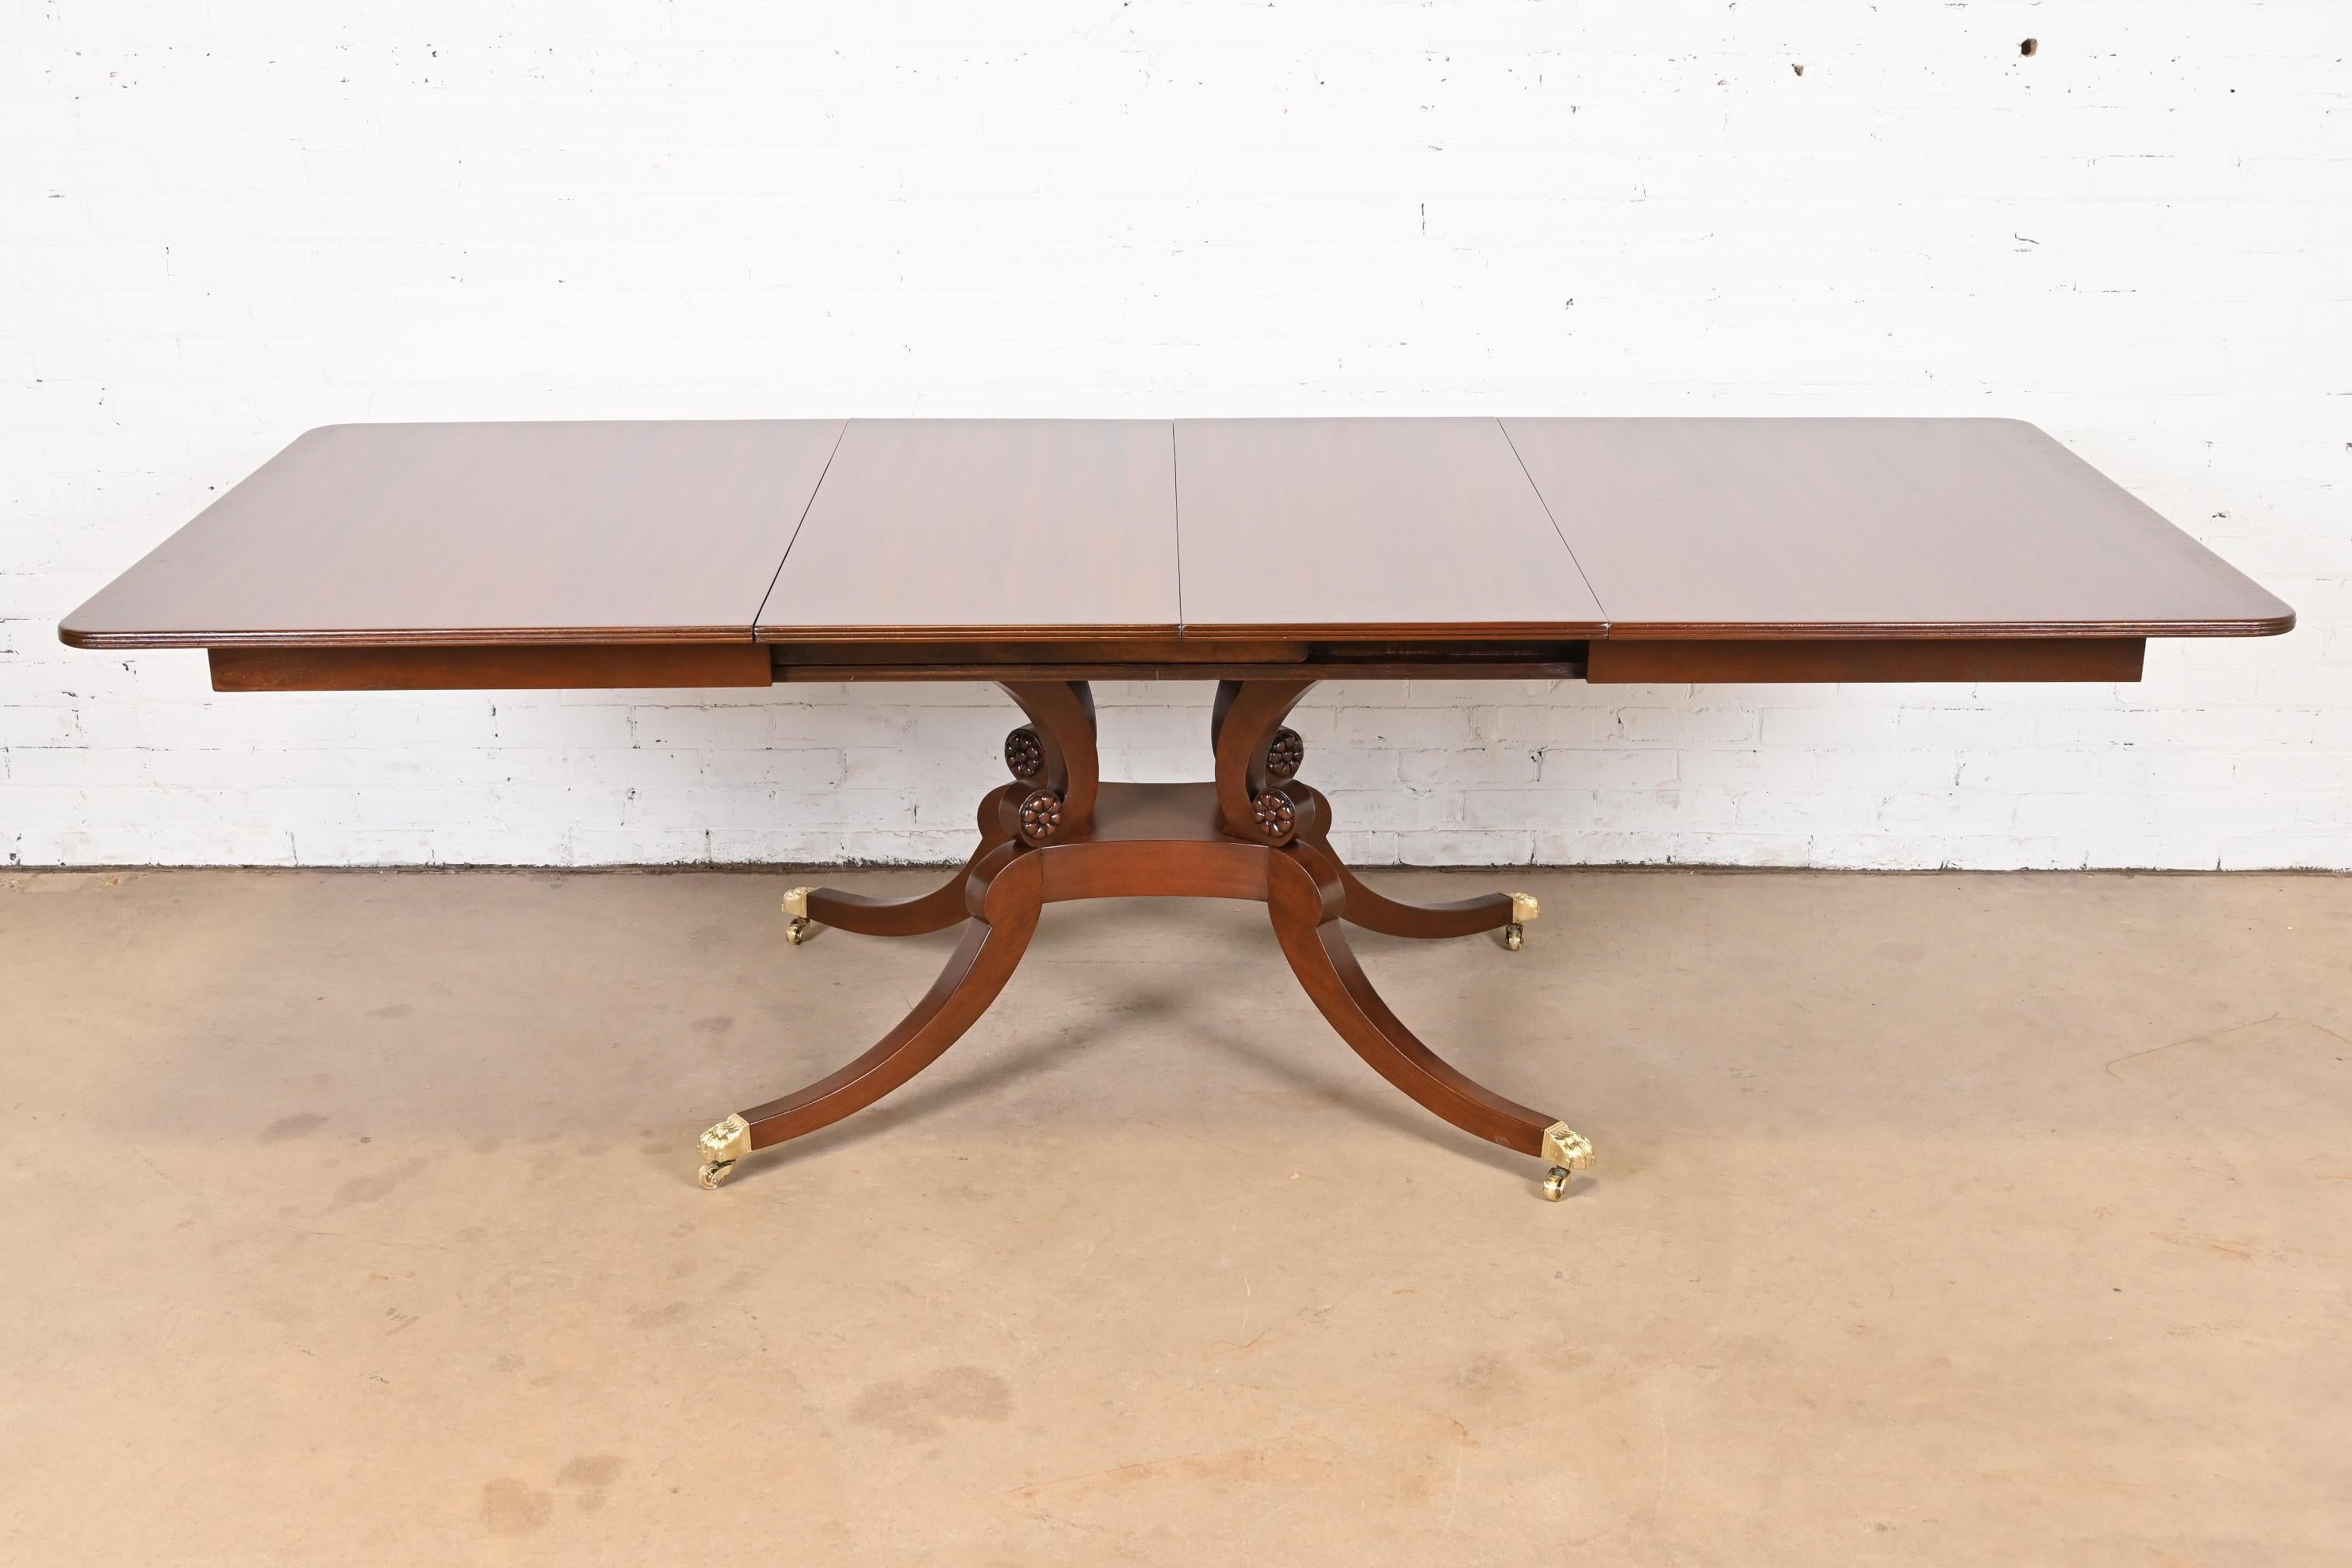 An exceptional Georgian or Regency style single pedestal extension dining table

In the manner of Baker Furniture

USA, Circa 1980s

Beautiful banded mahogany top, with carved solid mahogany pedestal, brass-capped paw feet on brass casters, and